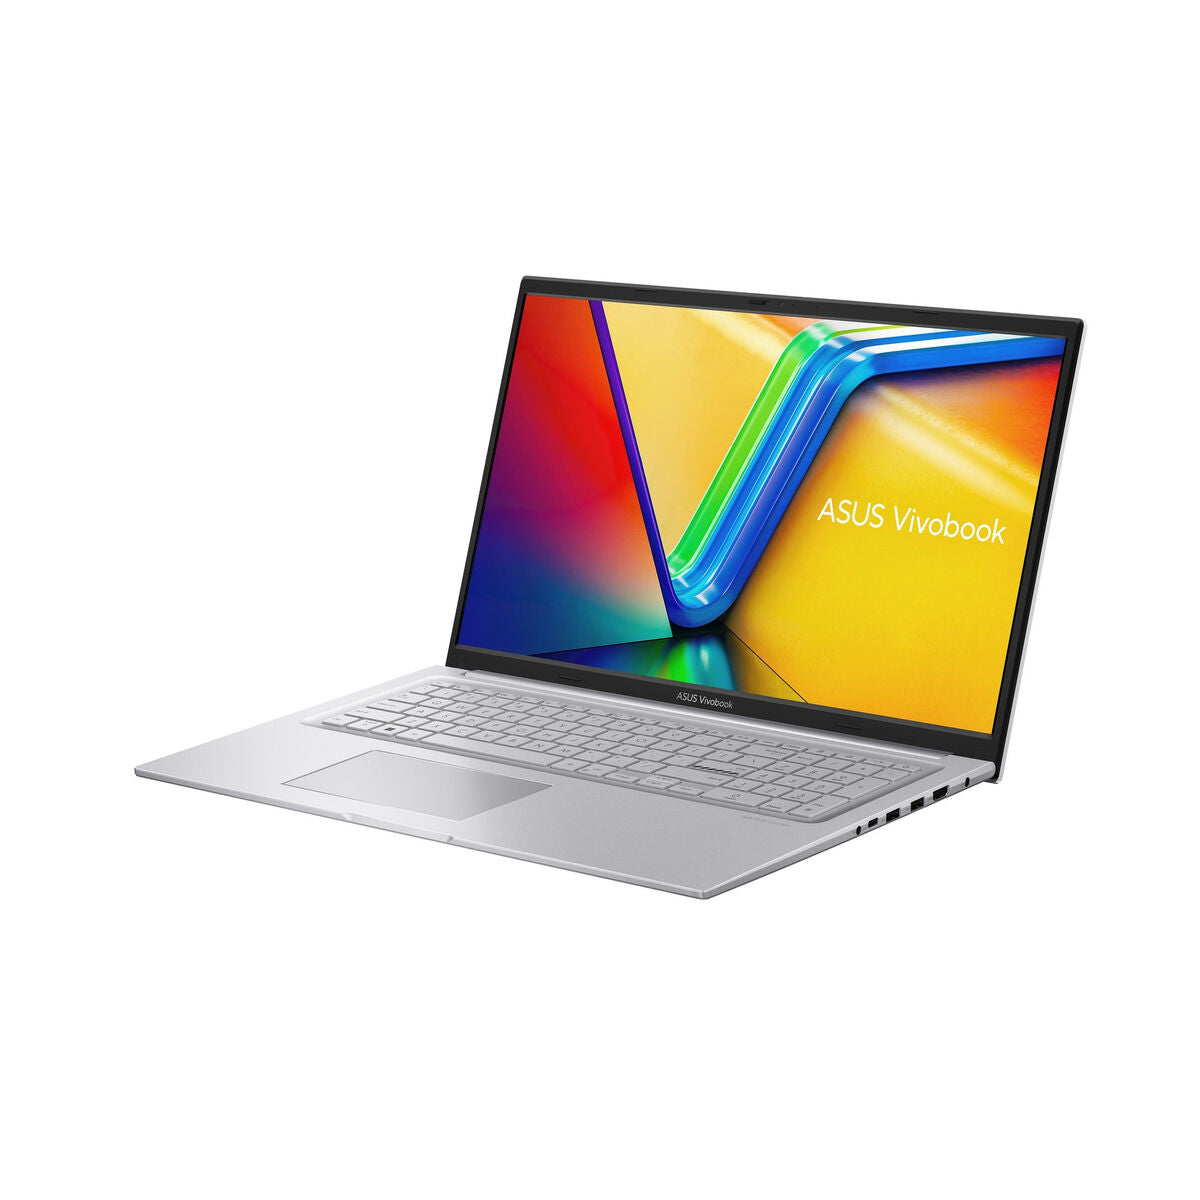 Laptop Asus Vivobook 17 F1704VA-AU083W 17,3" Intel Core i5-1335U 16 GB RAM 512 GB SSD, Asus, Computing, notebook-asus-vivobook-17-f1704va-au083w-512-gb-ssd-16-gb-ram-i5-1335u, :2-in-1, :512 GB, :Intel-i5, :QWERTY, :RAM 16 GB, :Touchscreen, Brand_Asus, category-reference-2609, category-reference-2791, category-reference-2797, category-reference-t-19685, Condition_NEW, office, Price_900 - 1000, Teleworking, RiotNook